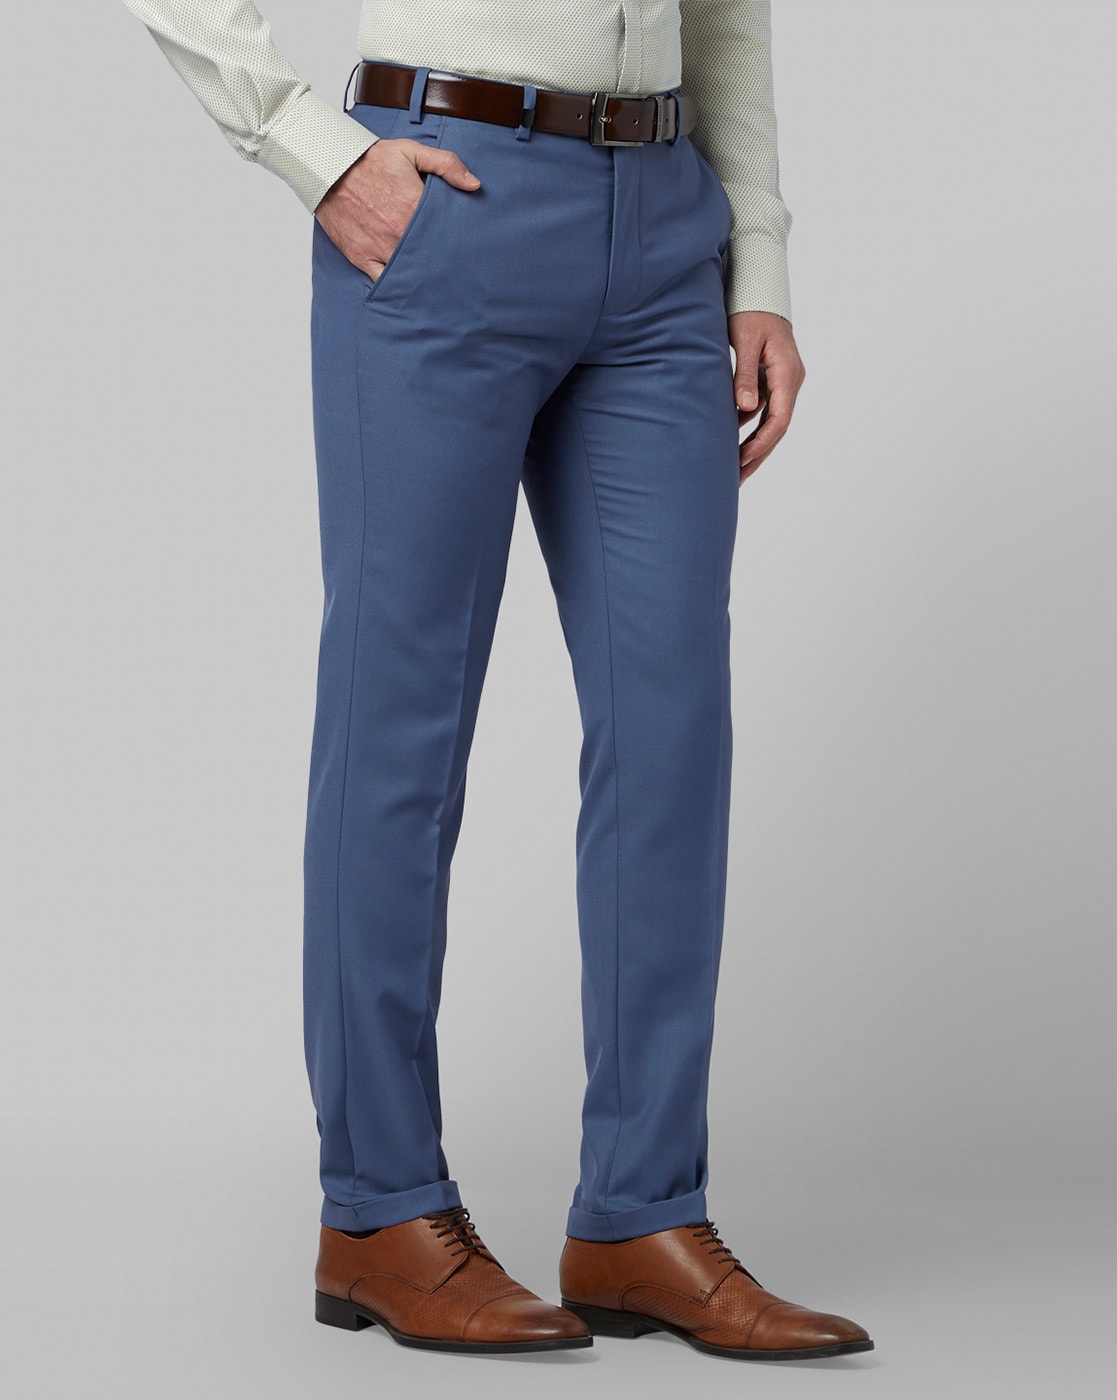 Park Avenue Formal Trousers  Buy Park Avenue Formal Trousers online in  India